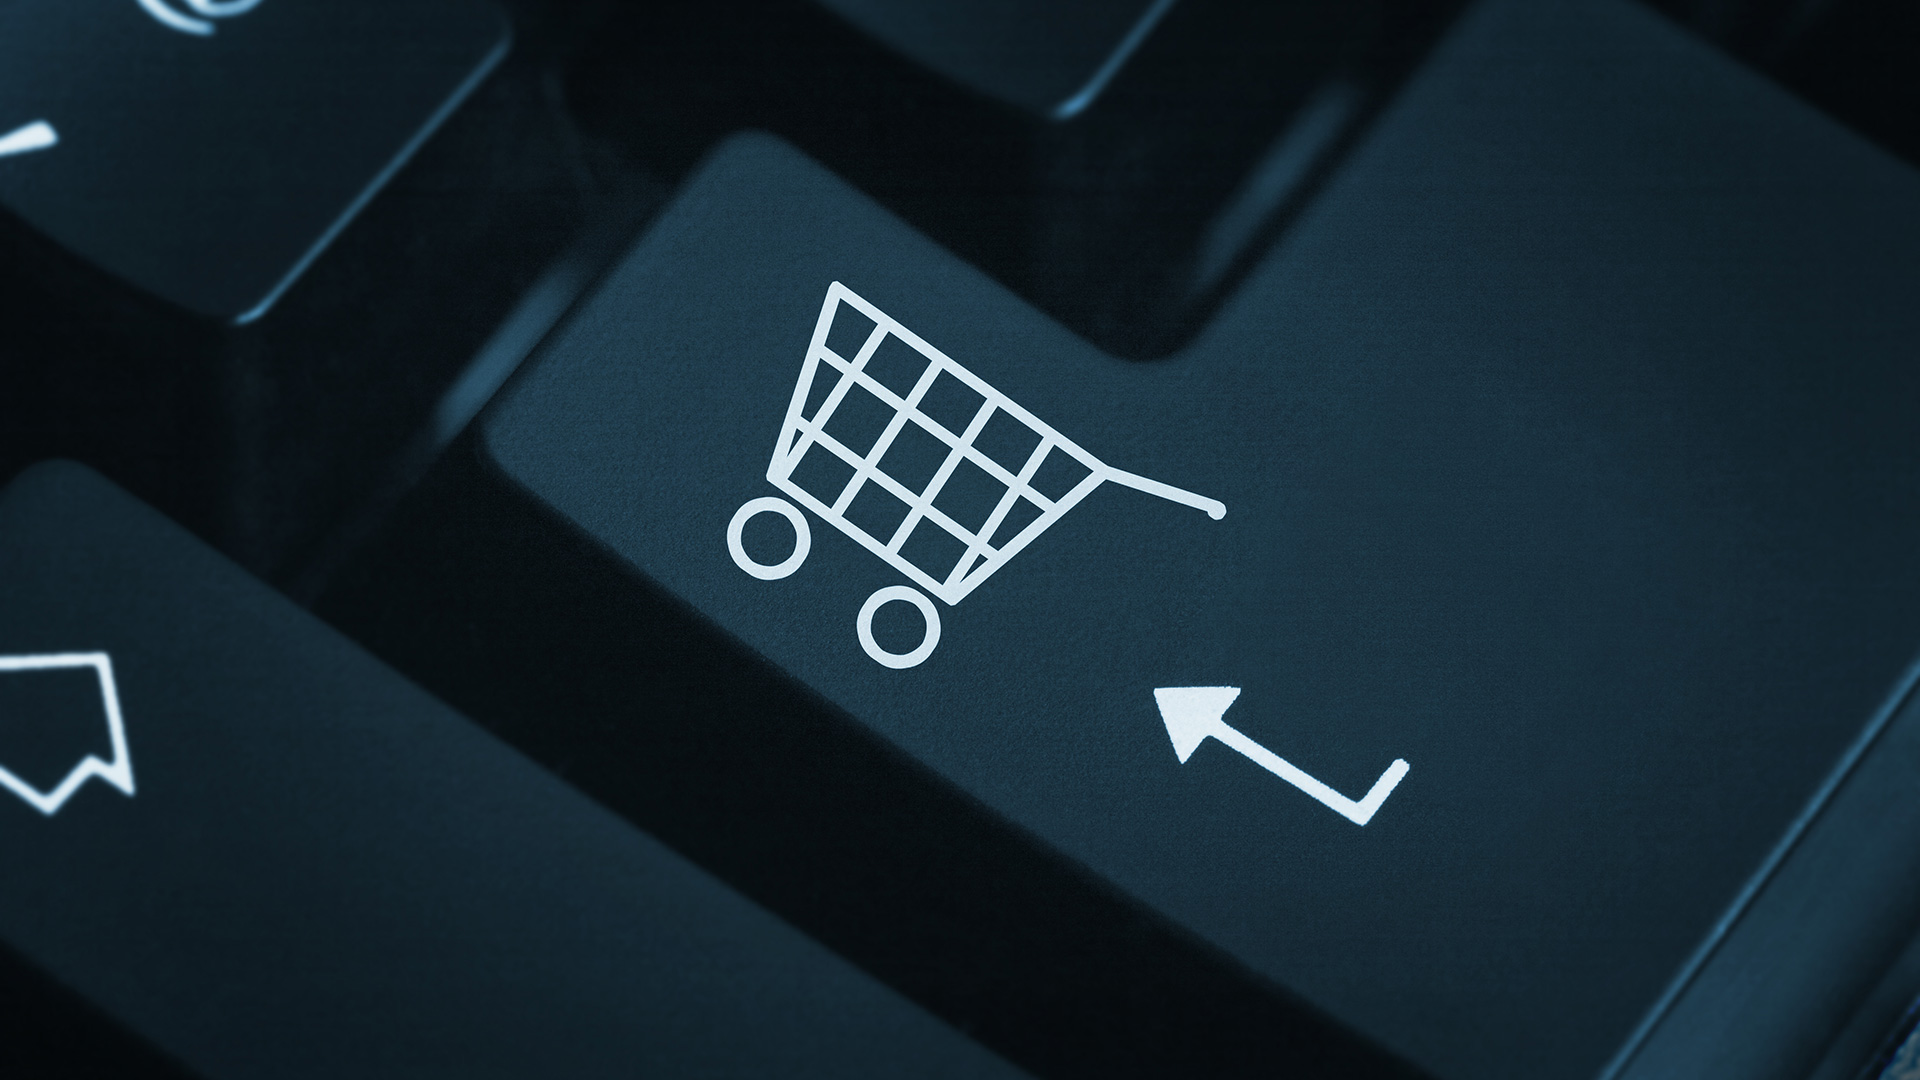 Top 10 Ecommerce Trends You Should Know in 2023